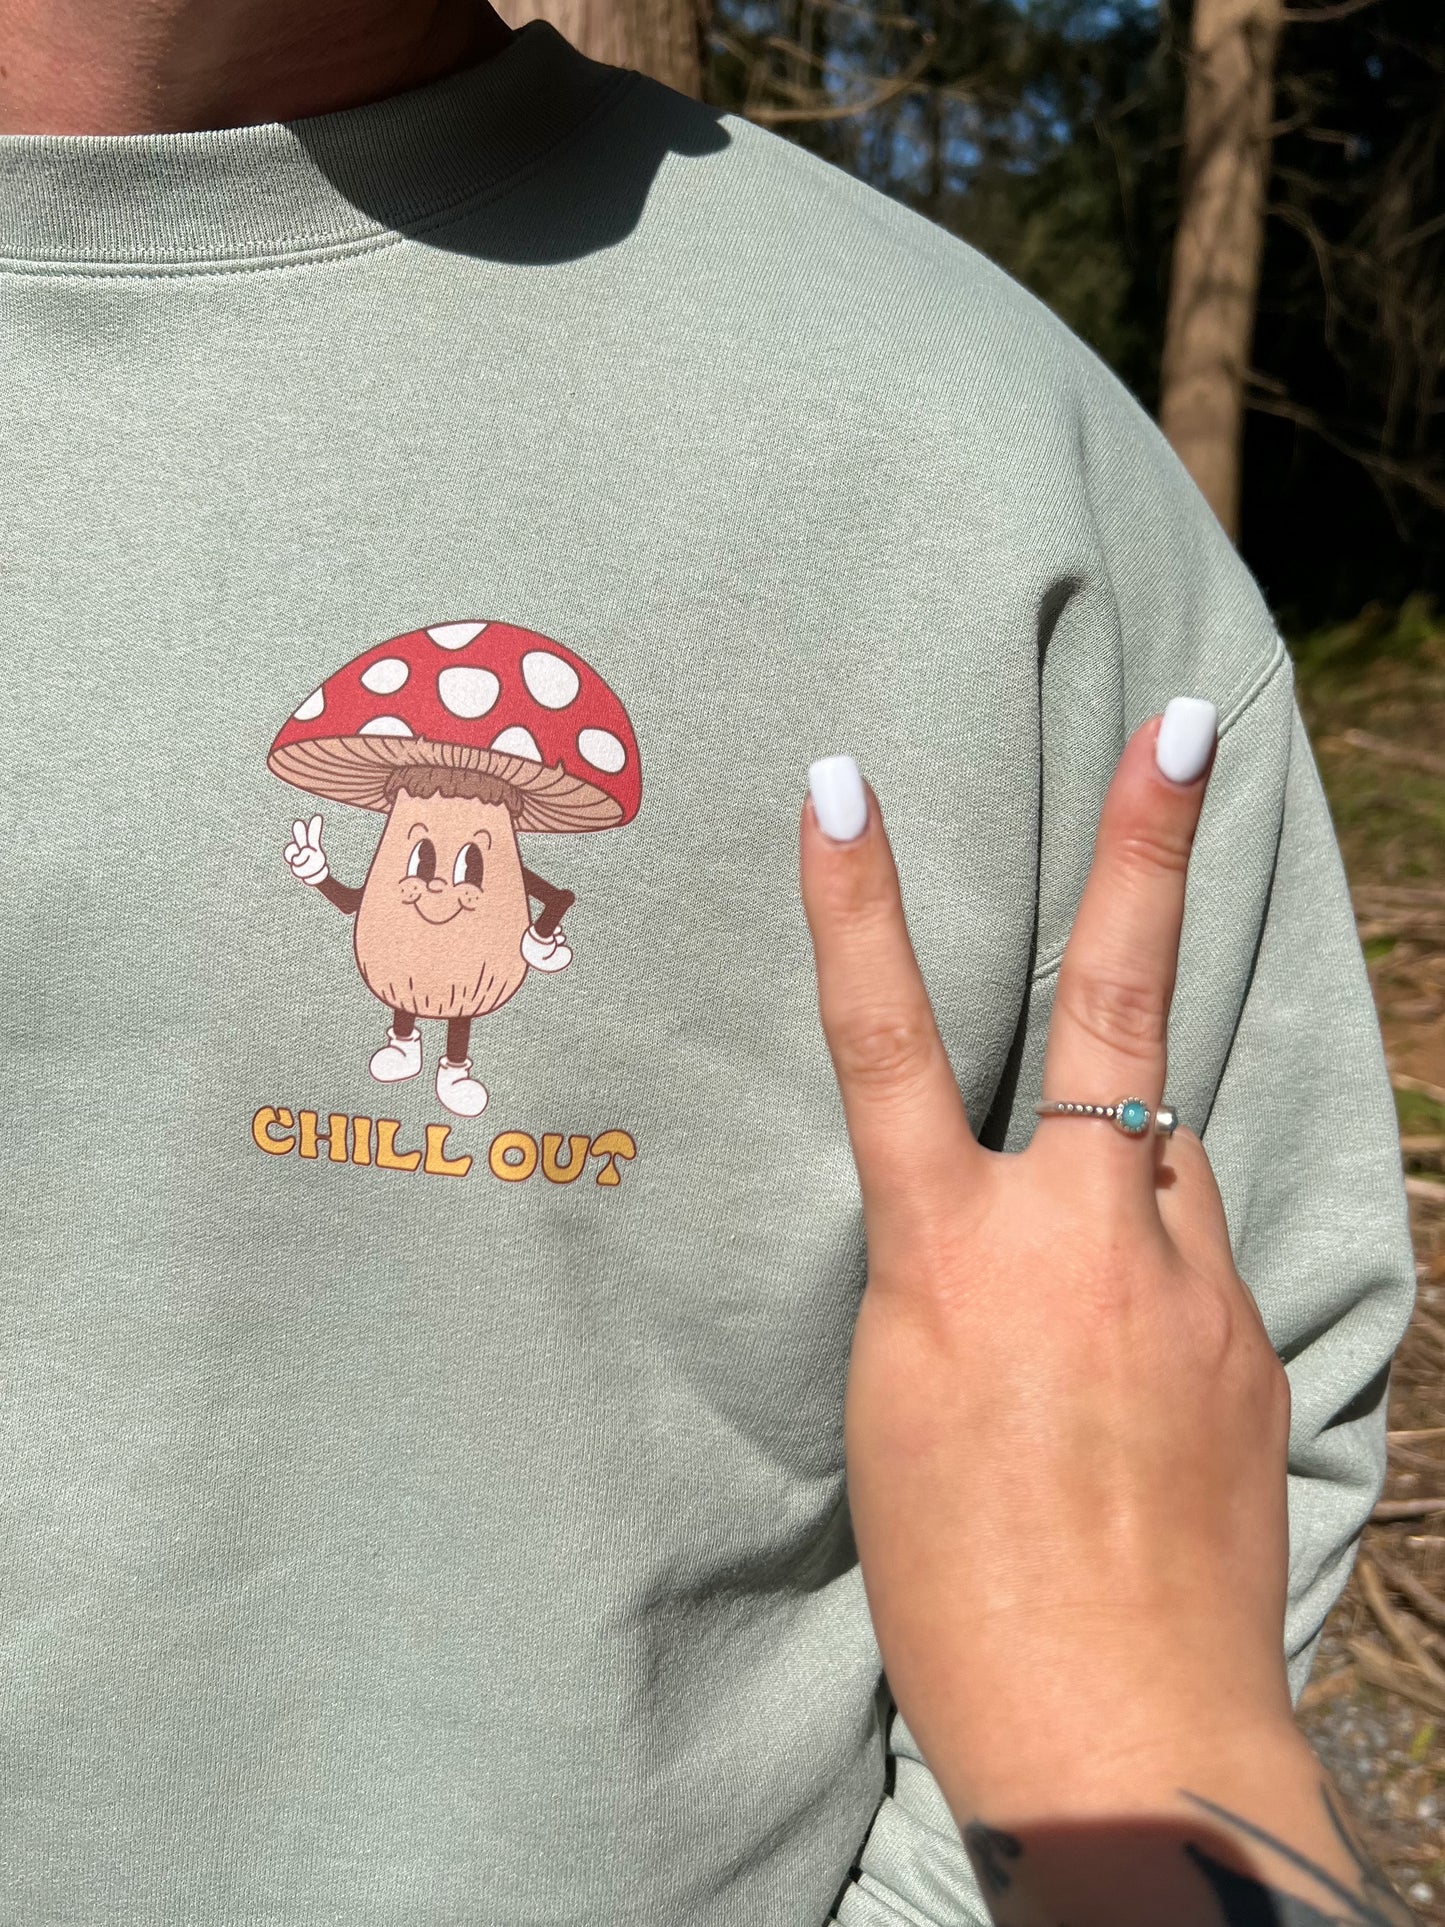 When in Doubt, Just Chill Out Mushroom Crewneck Sweatshirt